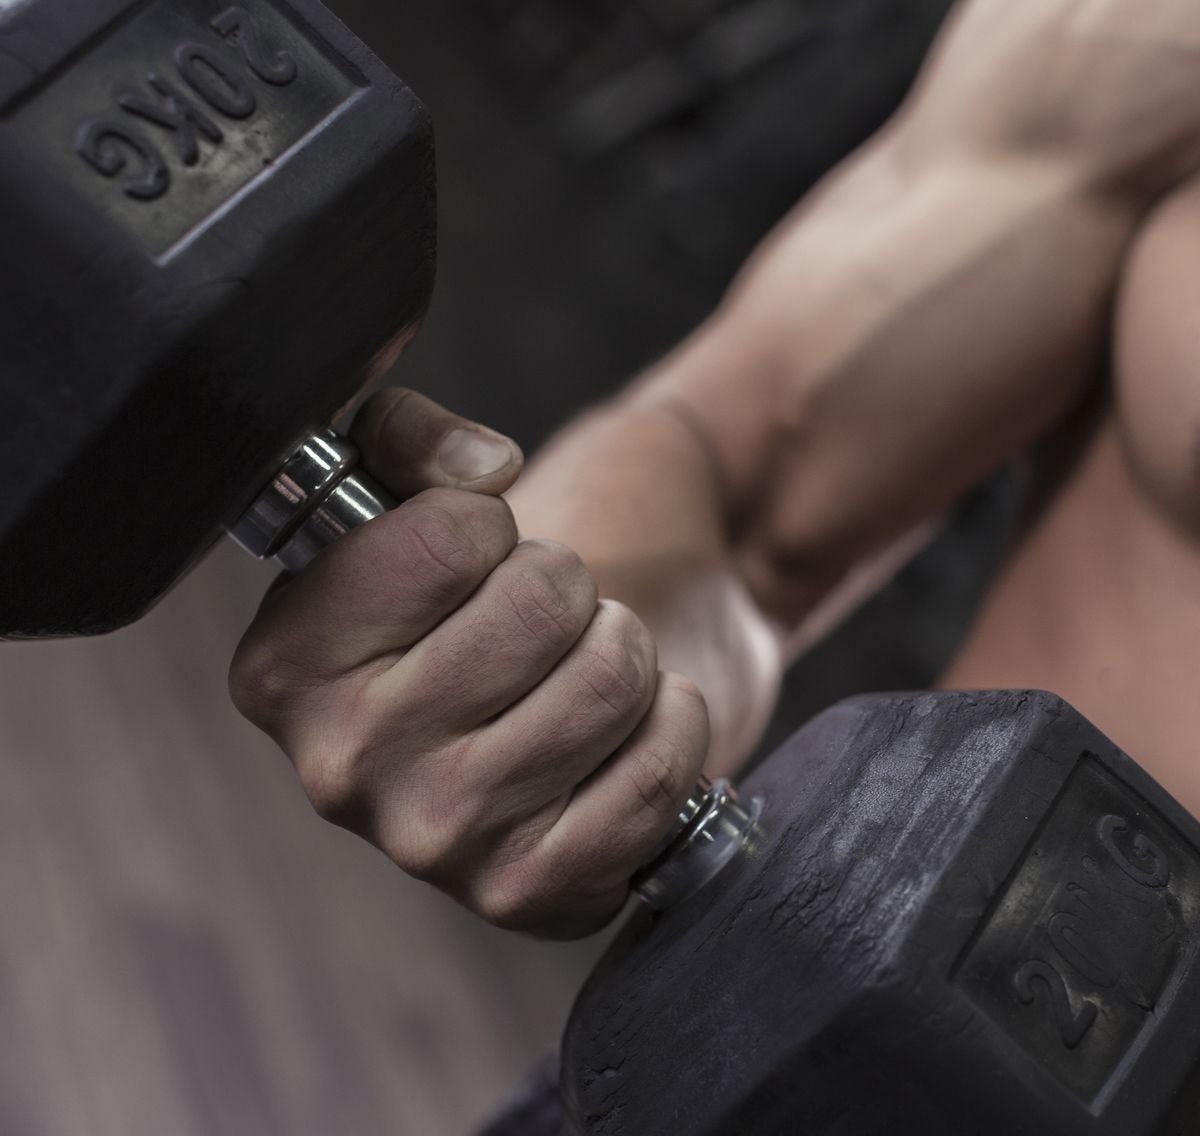 Male bodybuilder holding dumbbell in his hand at gym